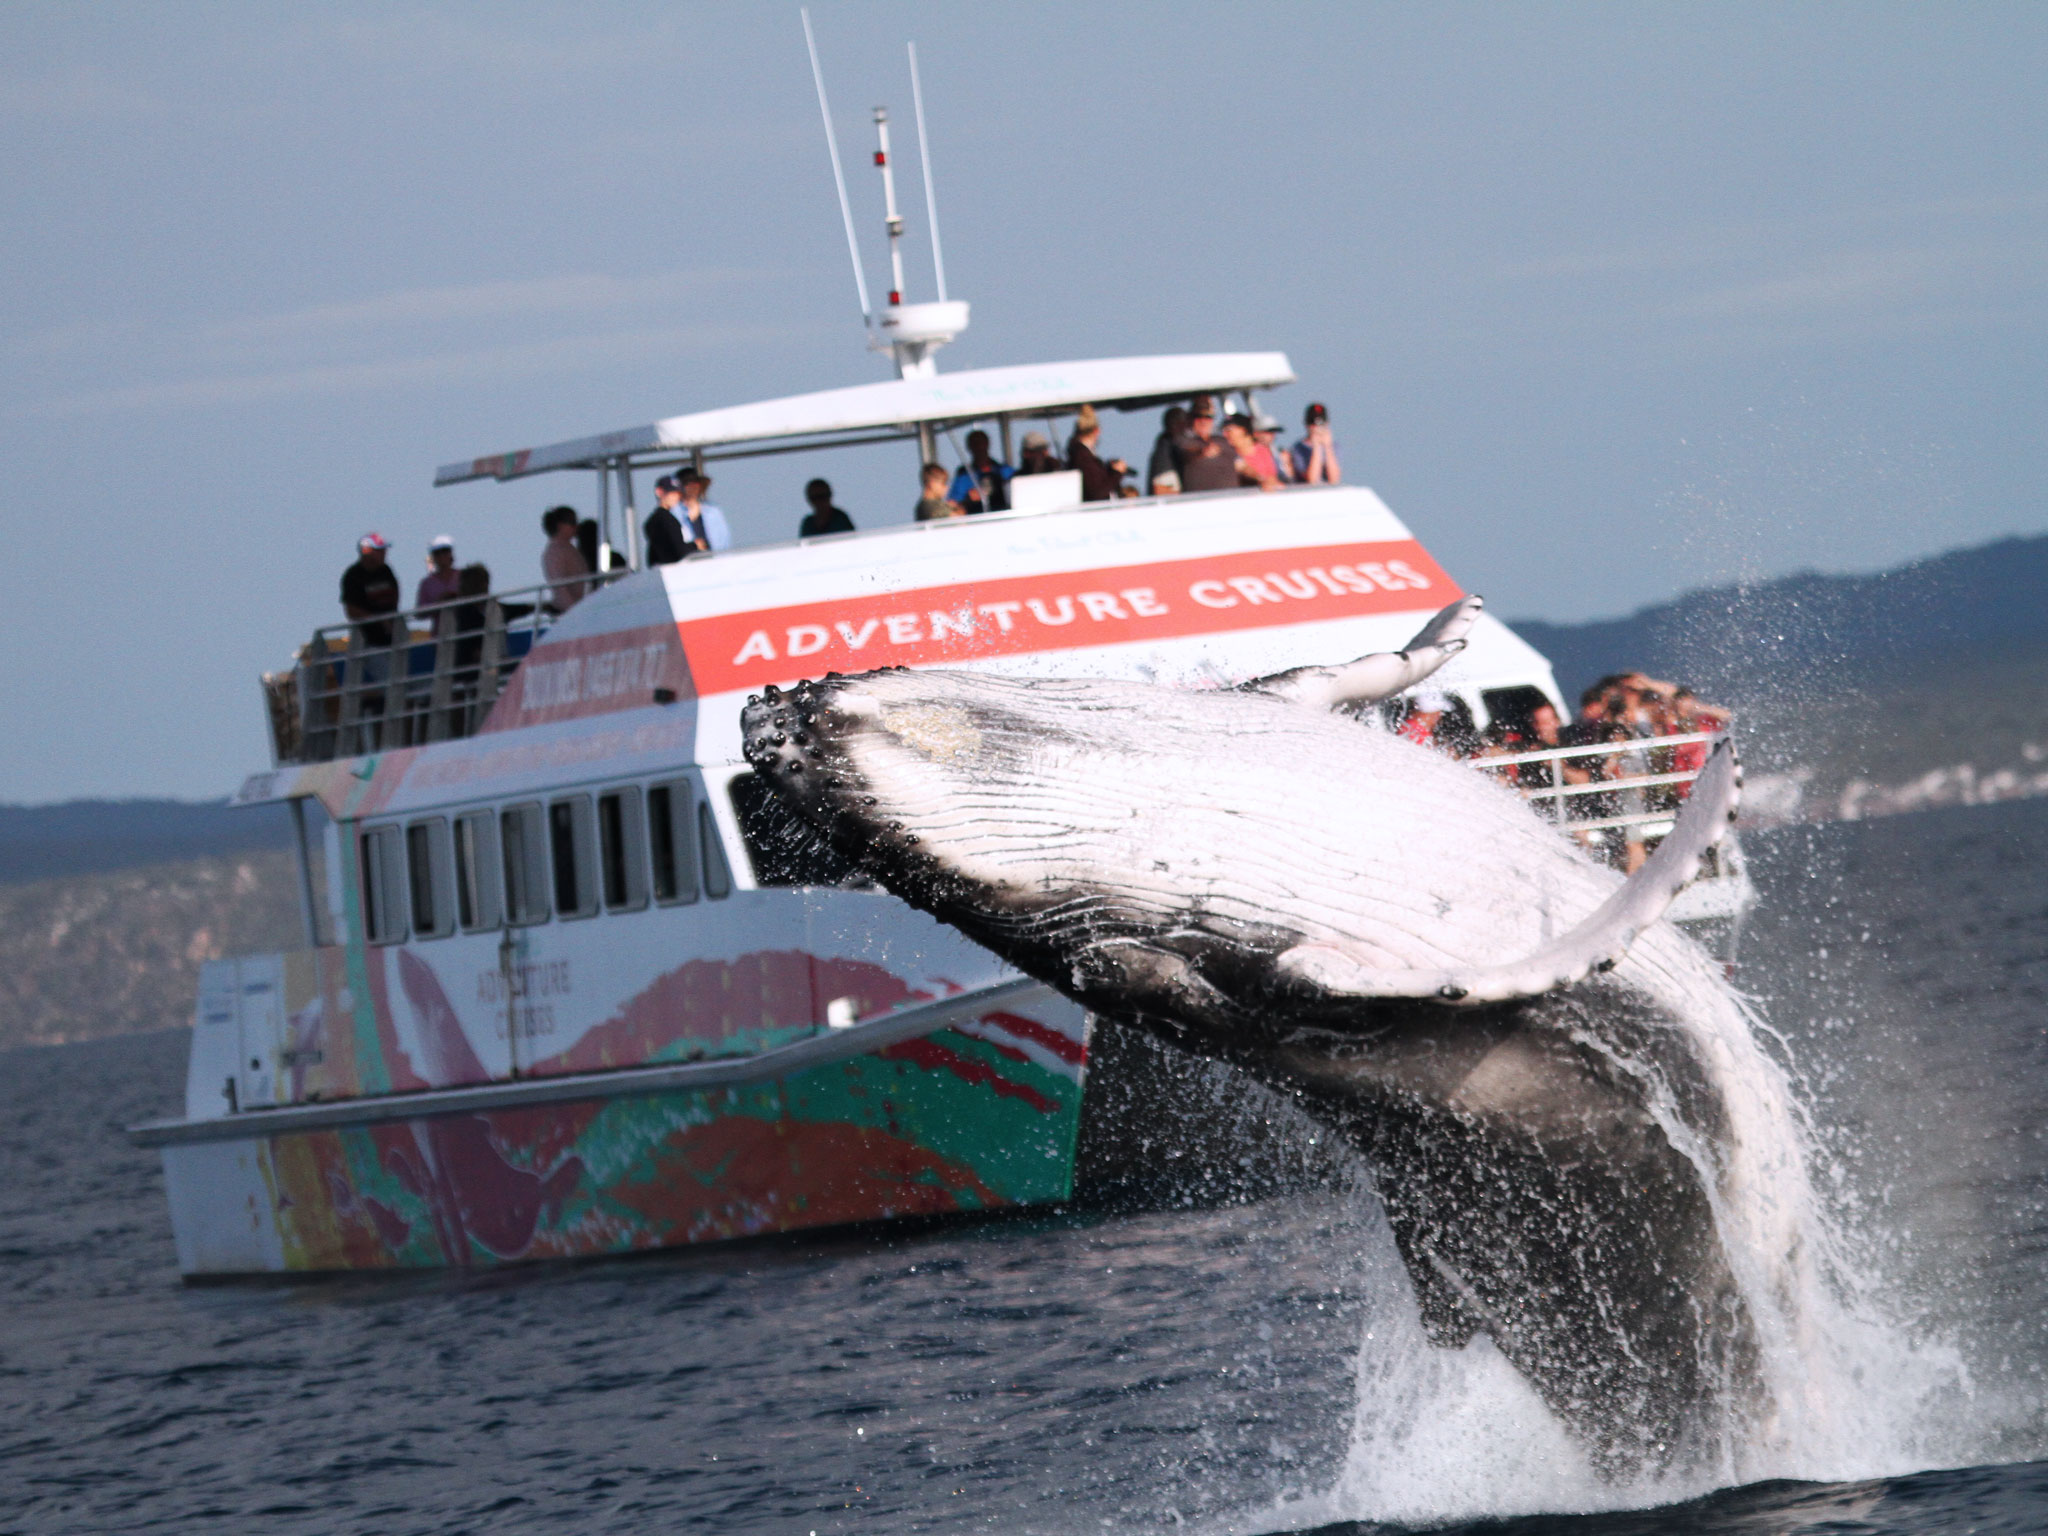 brooklyn whale watching tours